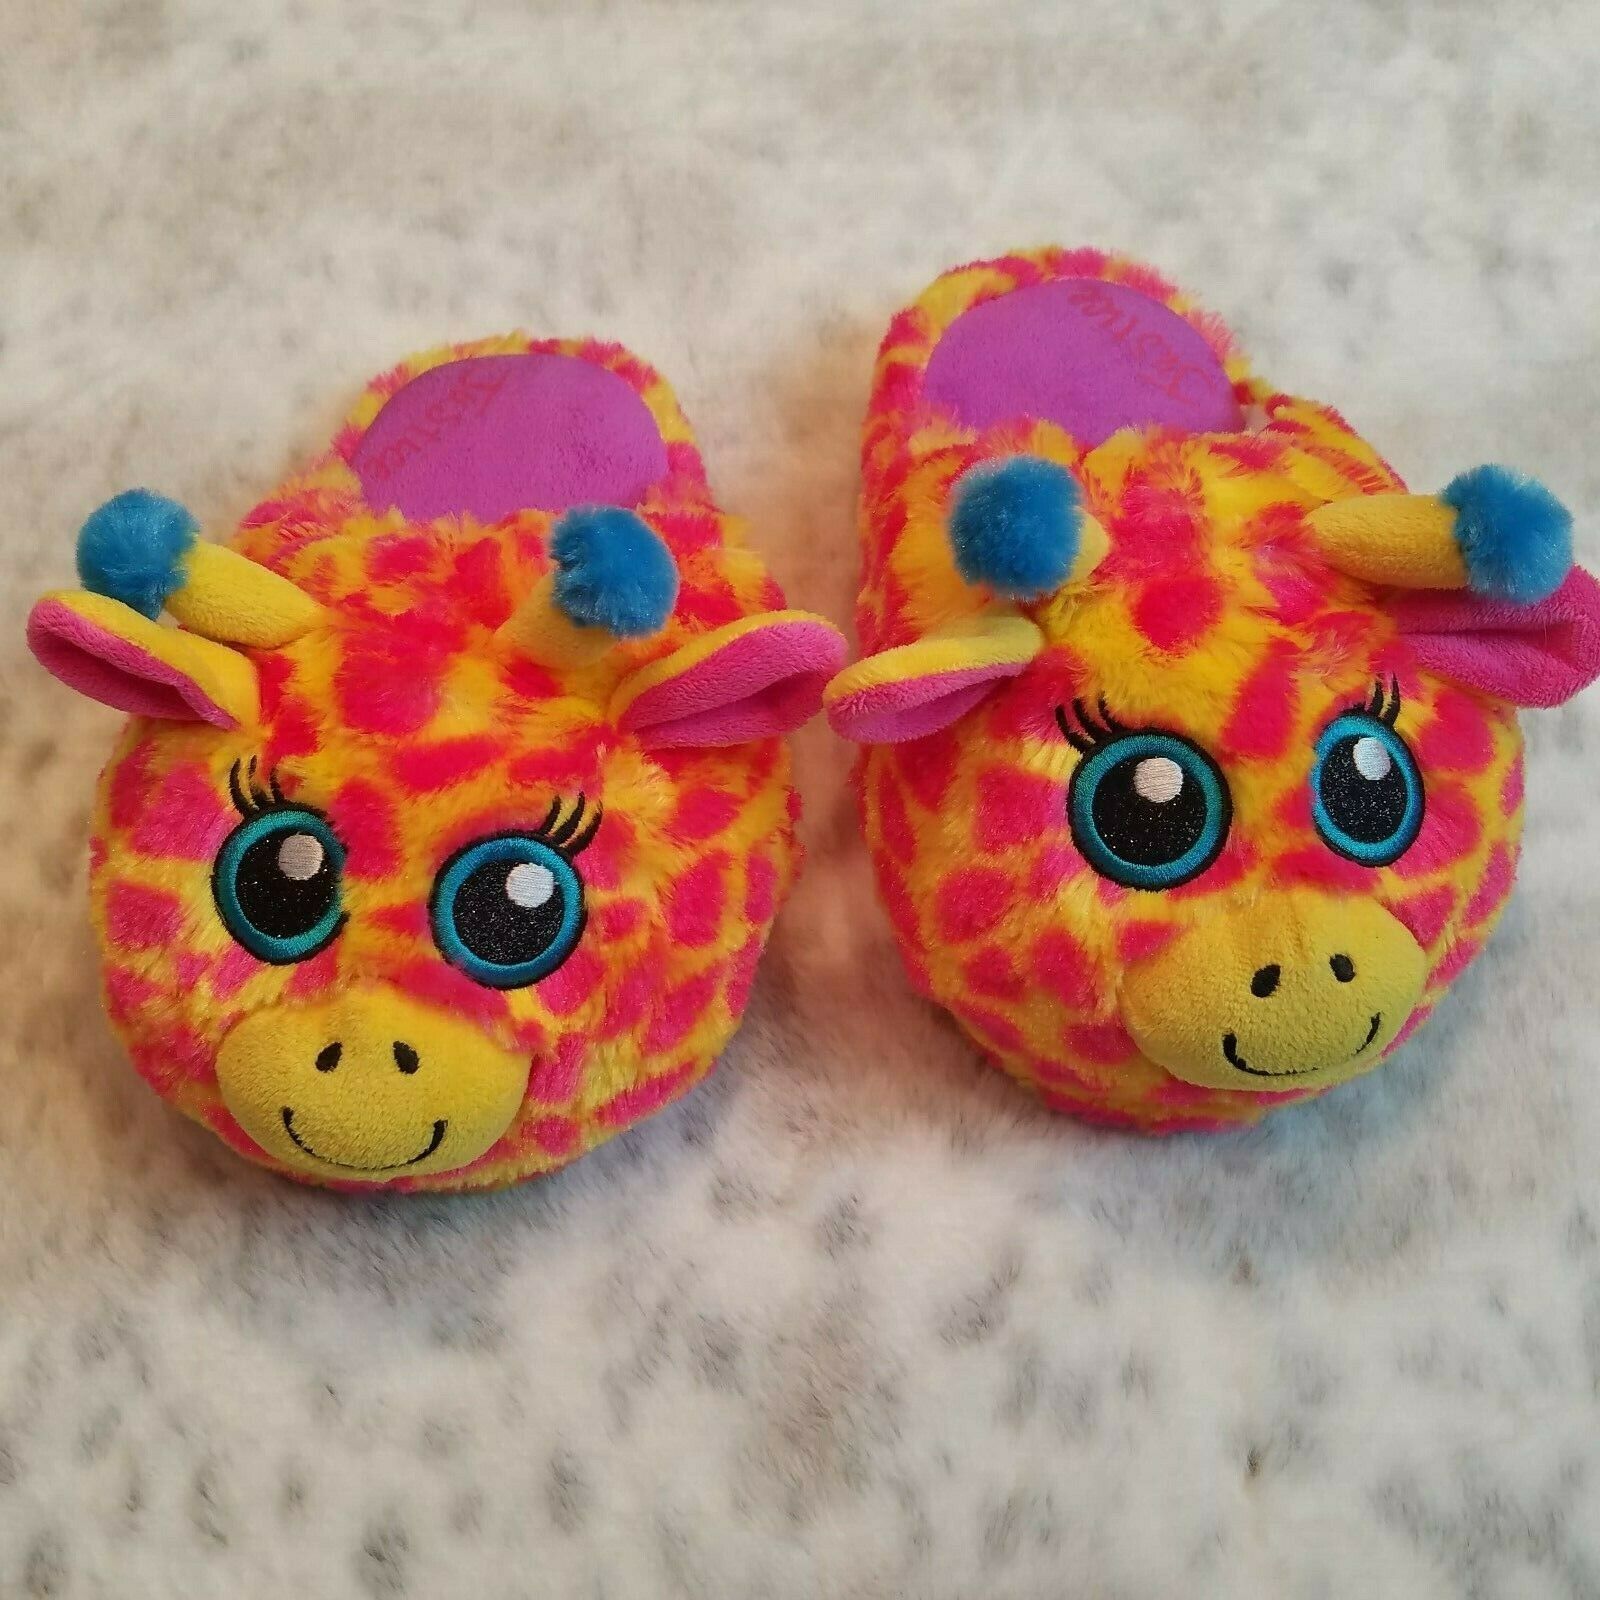 Justice Giraffe Slippers MED 4/5 Pink Yellow Sparkly Black Eyes Purple Bottoms - $14.84